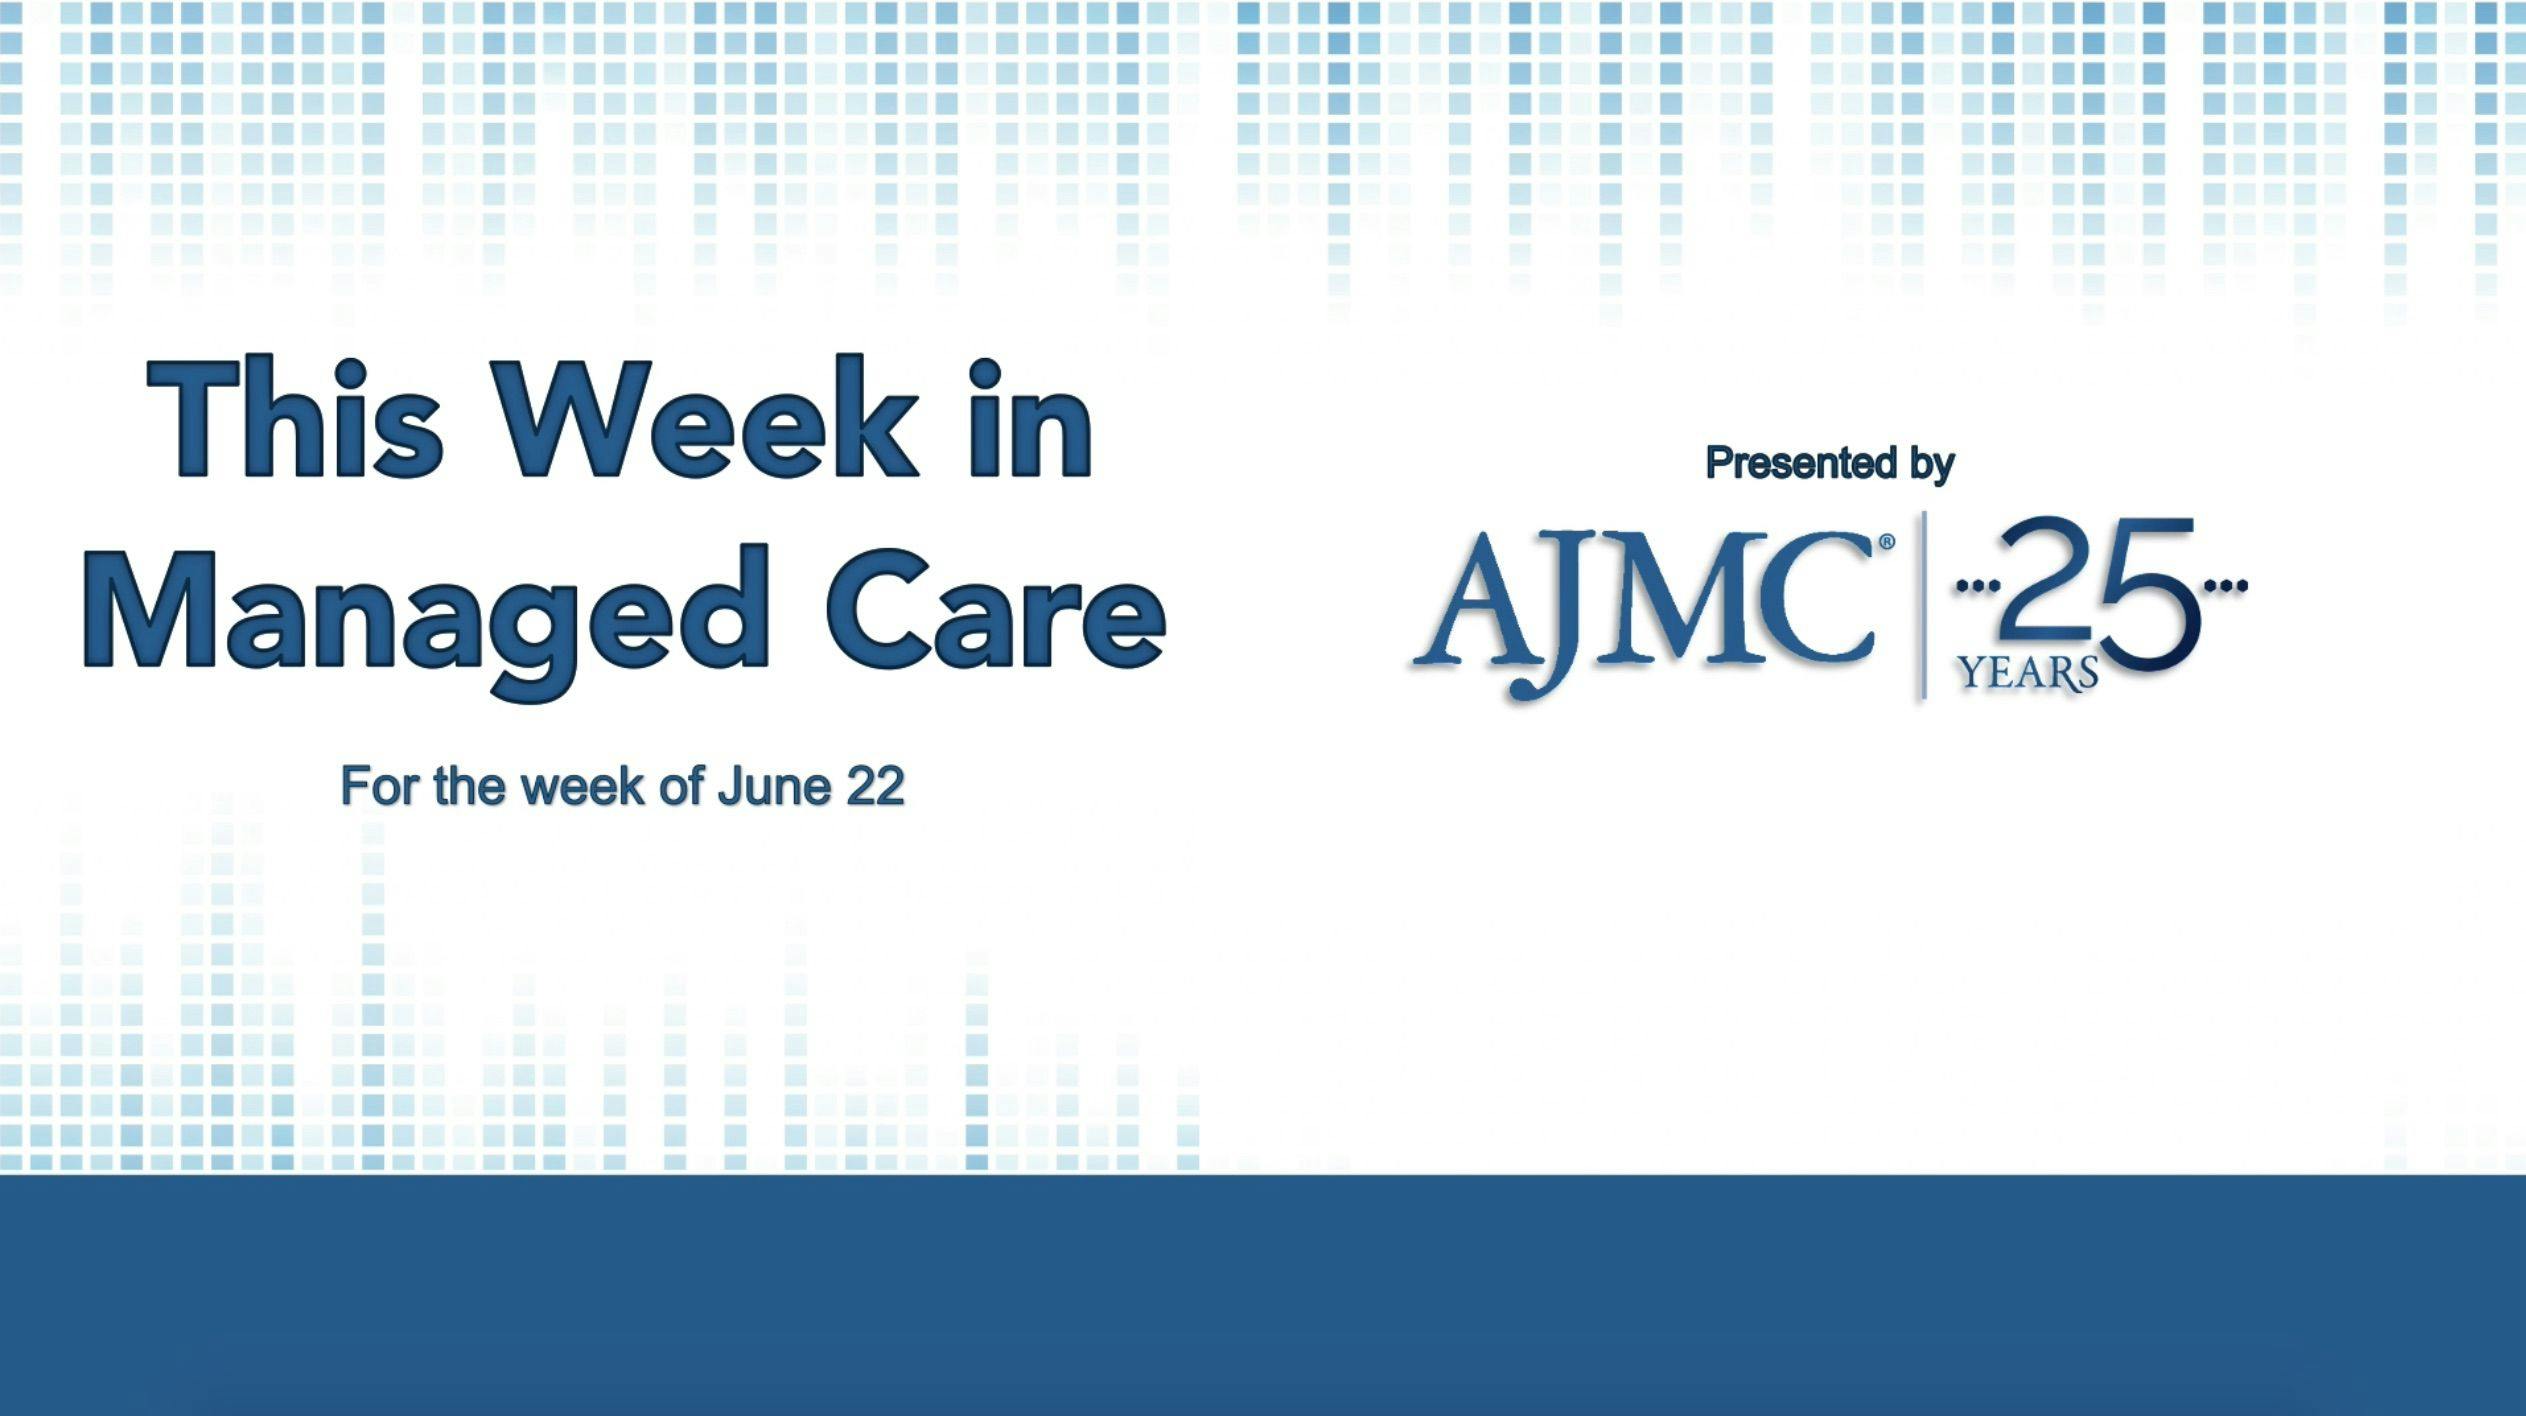 This Week in Managed Care: June 26, 2020